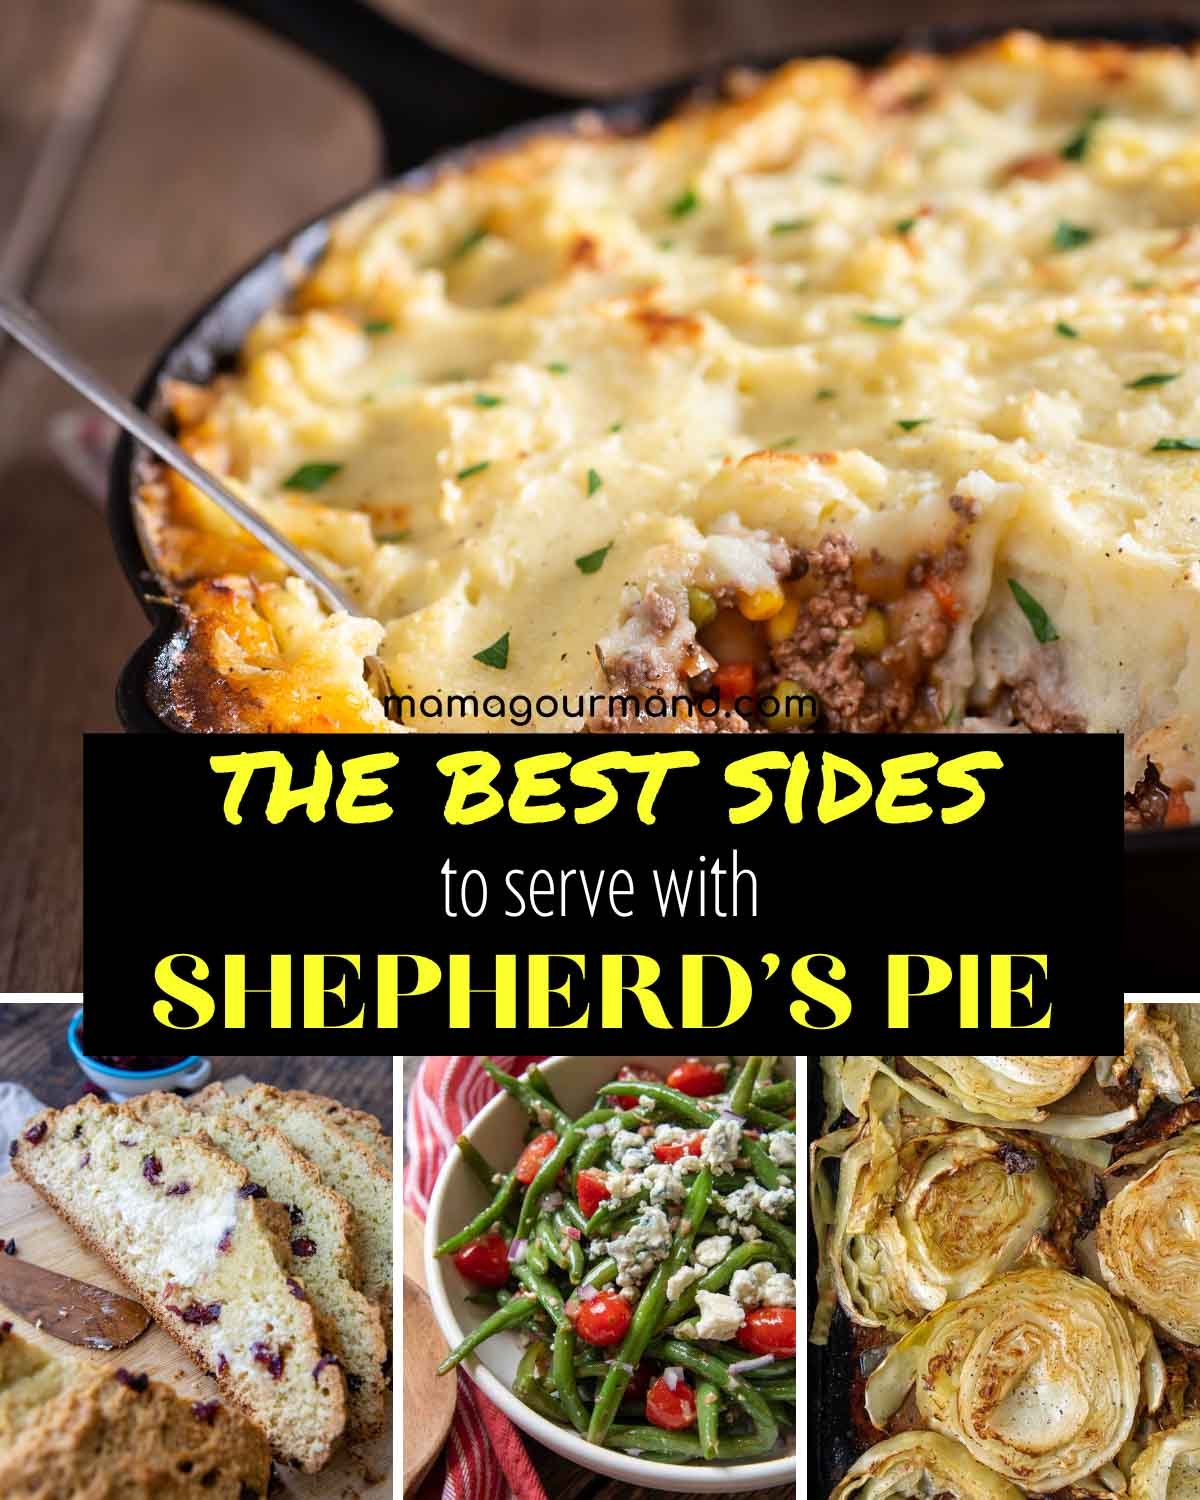 image showing shepherd's pie and side dishes to serve with it.